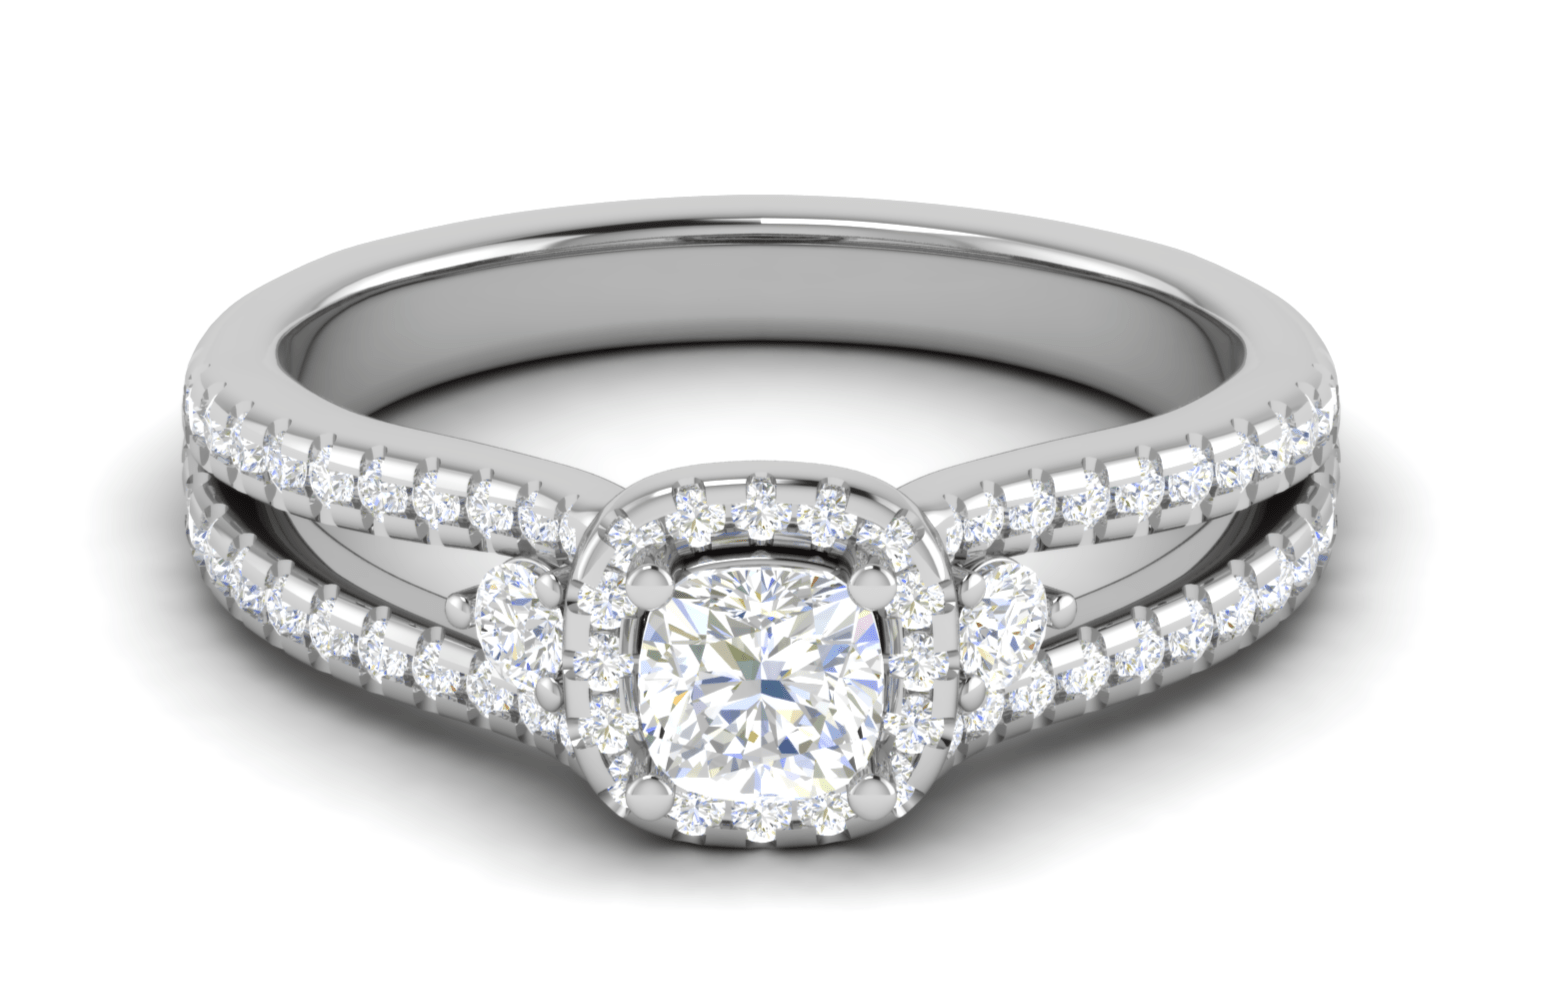 Significance of engagement rings | Times of India